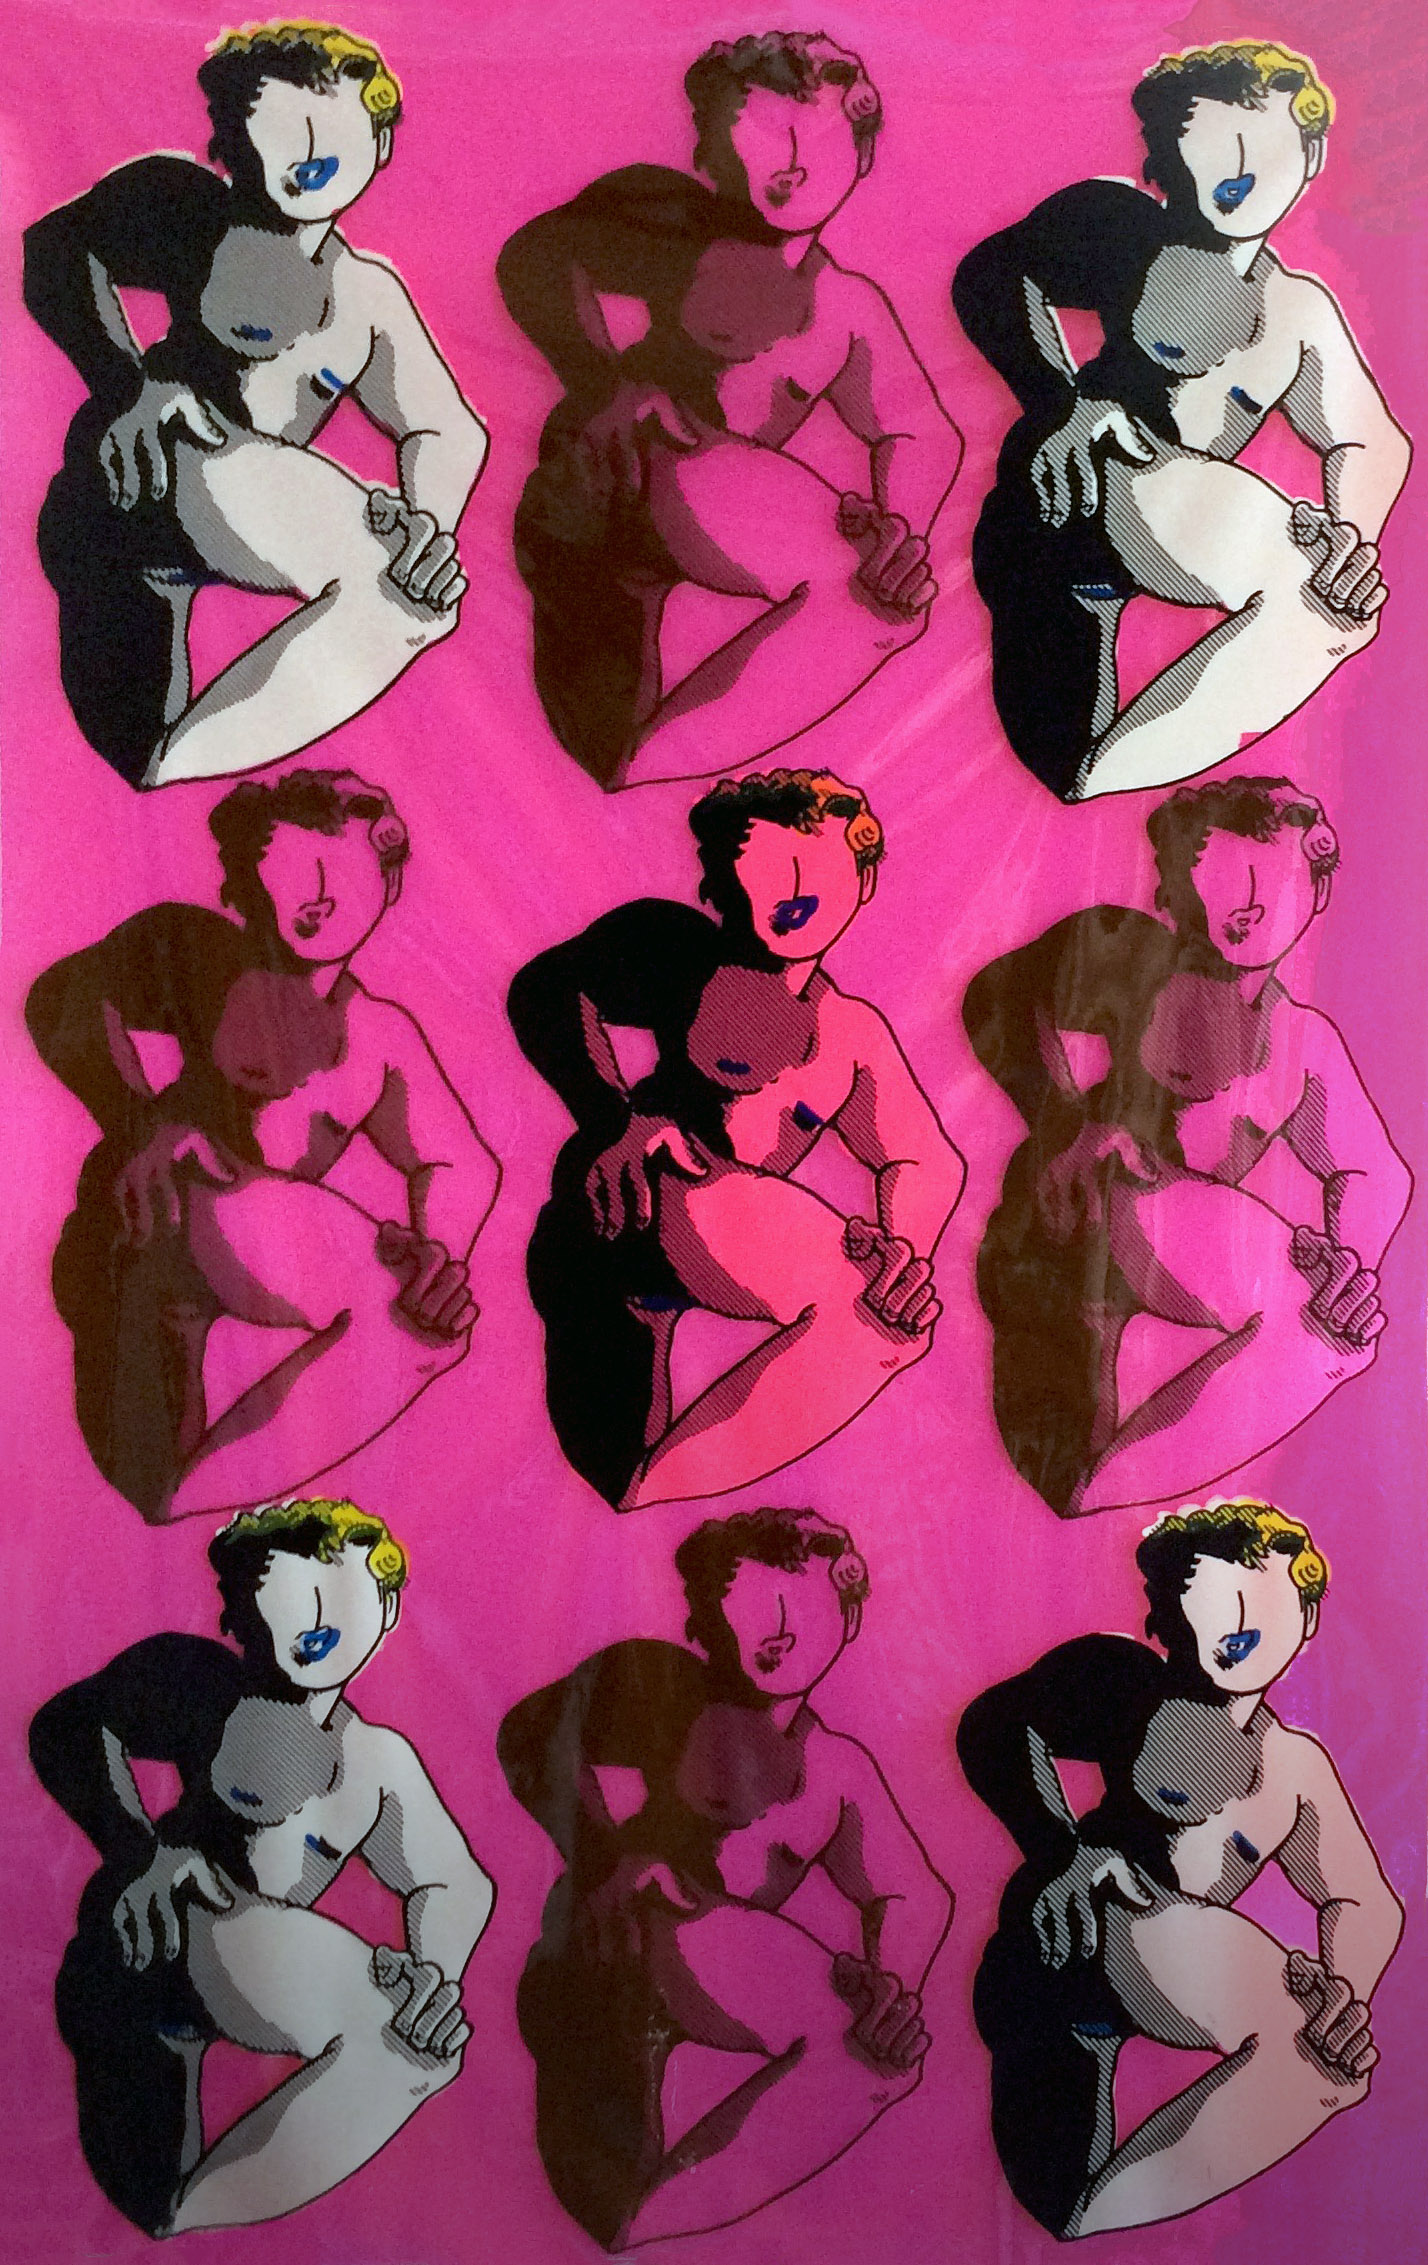 An artwork by Jacob Mills. The artwork depicts the back of a human figure with the torso turned to face the viewer. The figure is repeated across the print in a grid formation. The figures are colored in either a bright pink or grey color.